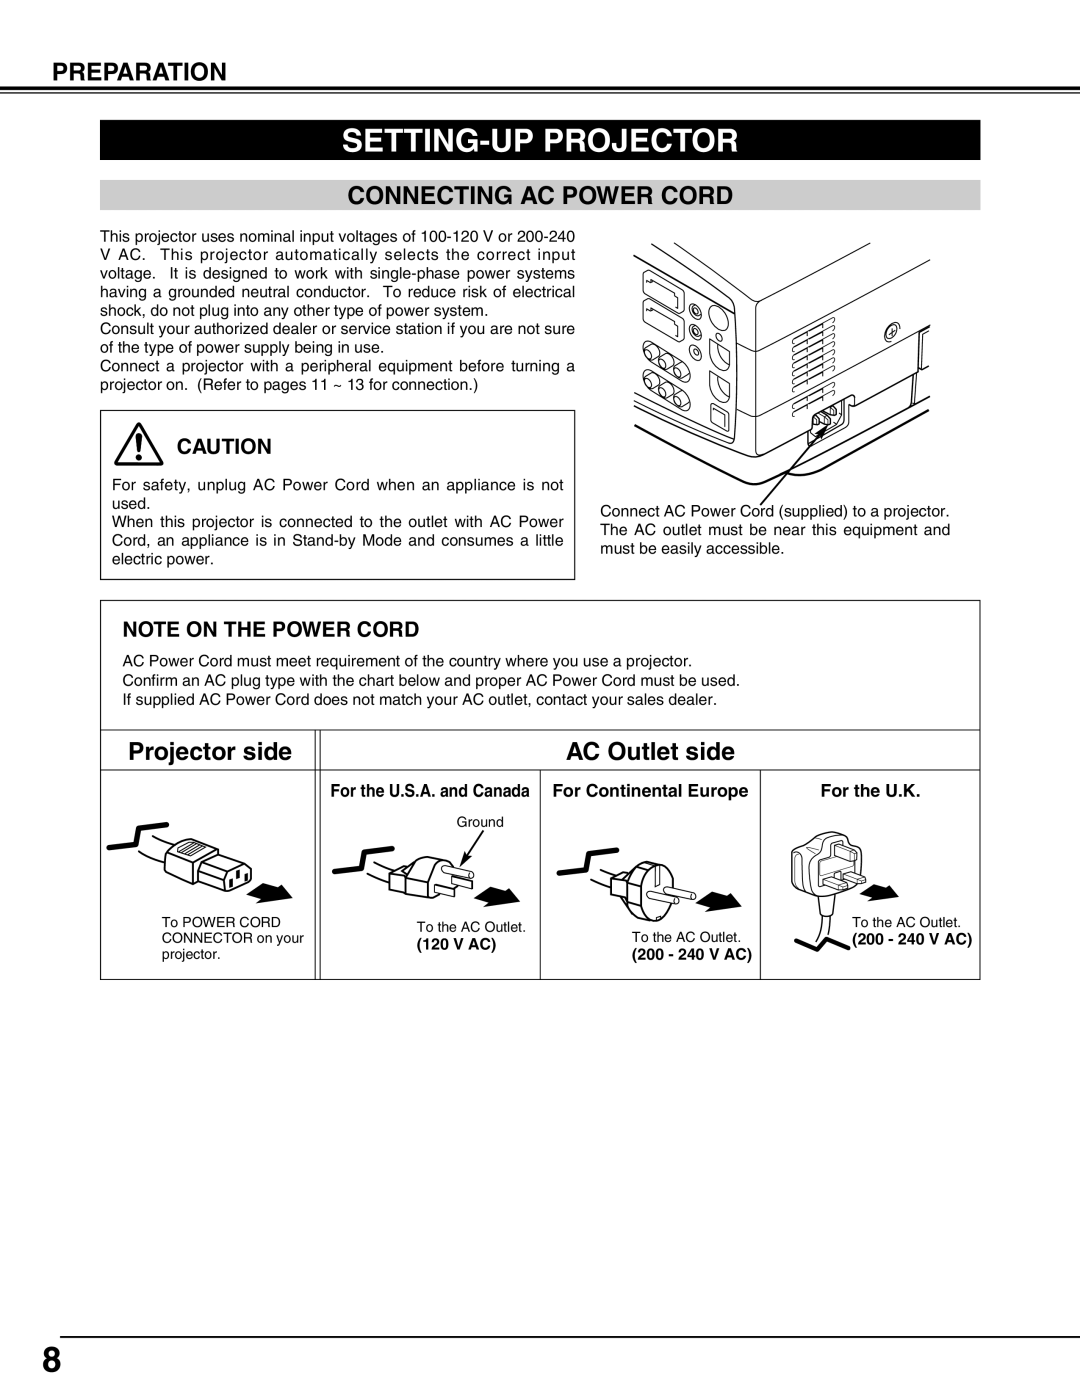 Sanyo PLC-XT10A owner manual Setting-Upprojector, For the U.S.A. and Canada, V Ac, 200 - 240 V AC 